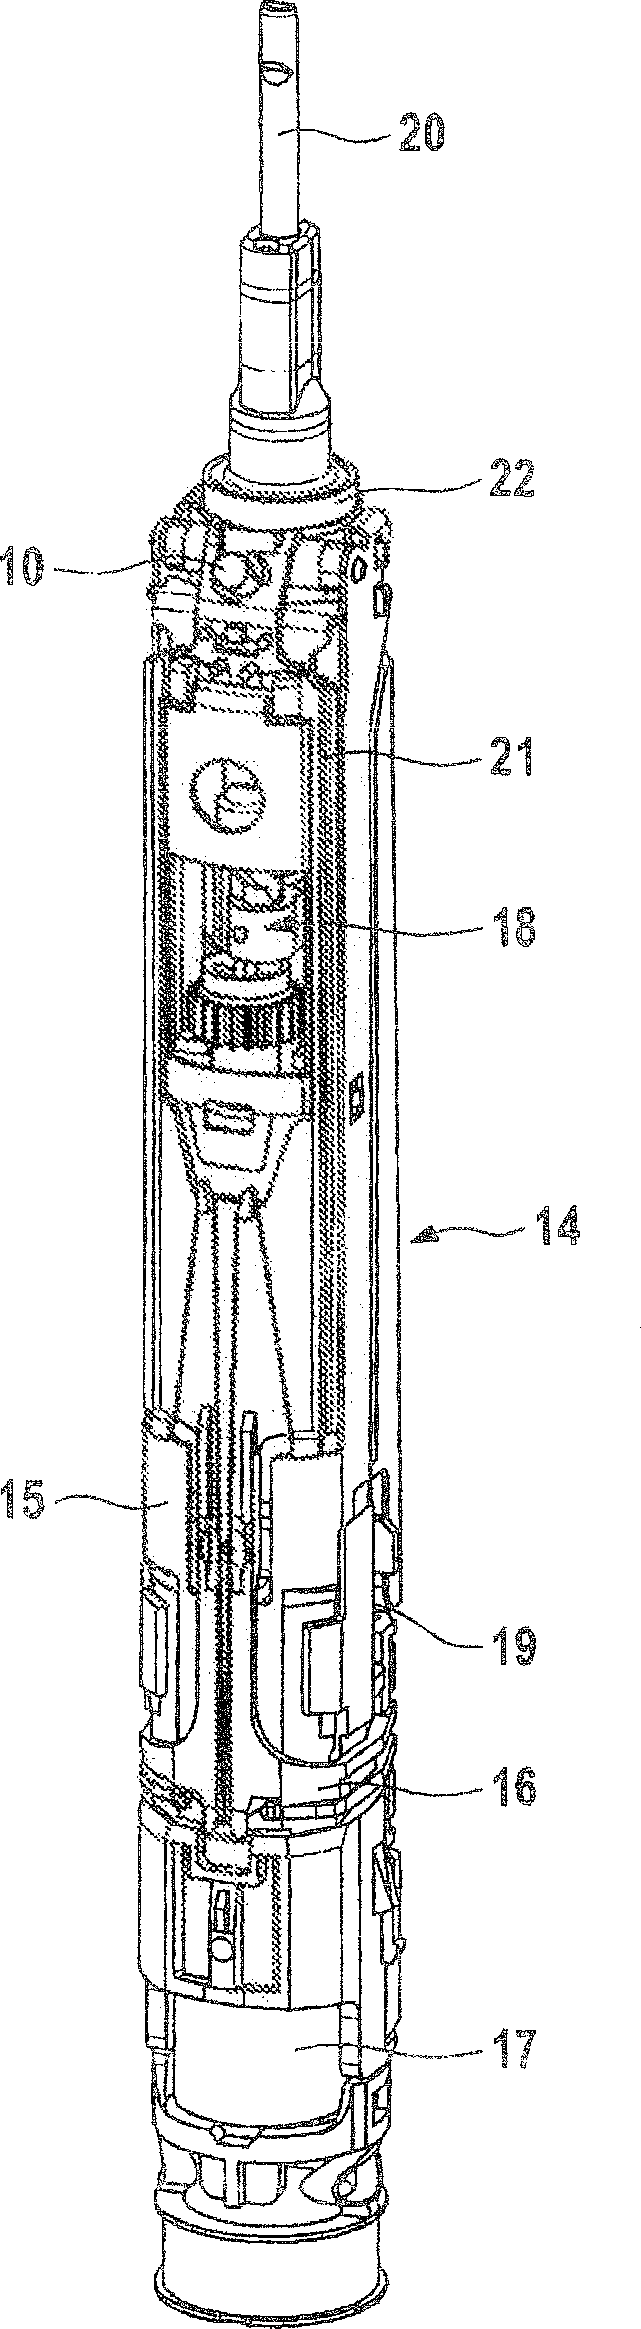 Electric toothbrush and method of manufacturing an electric toothbrush